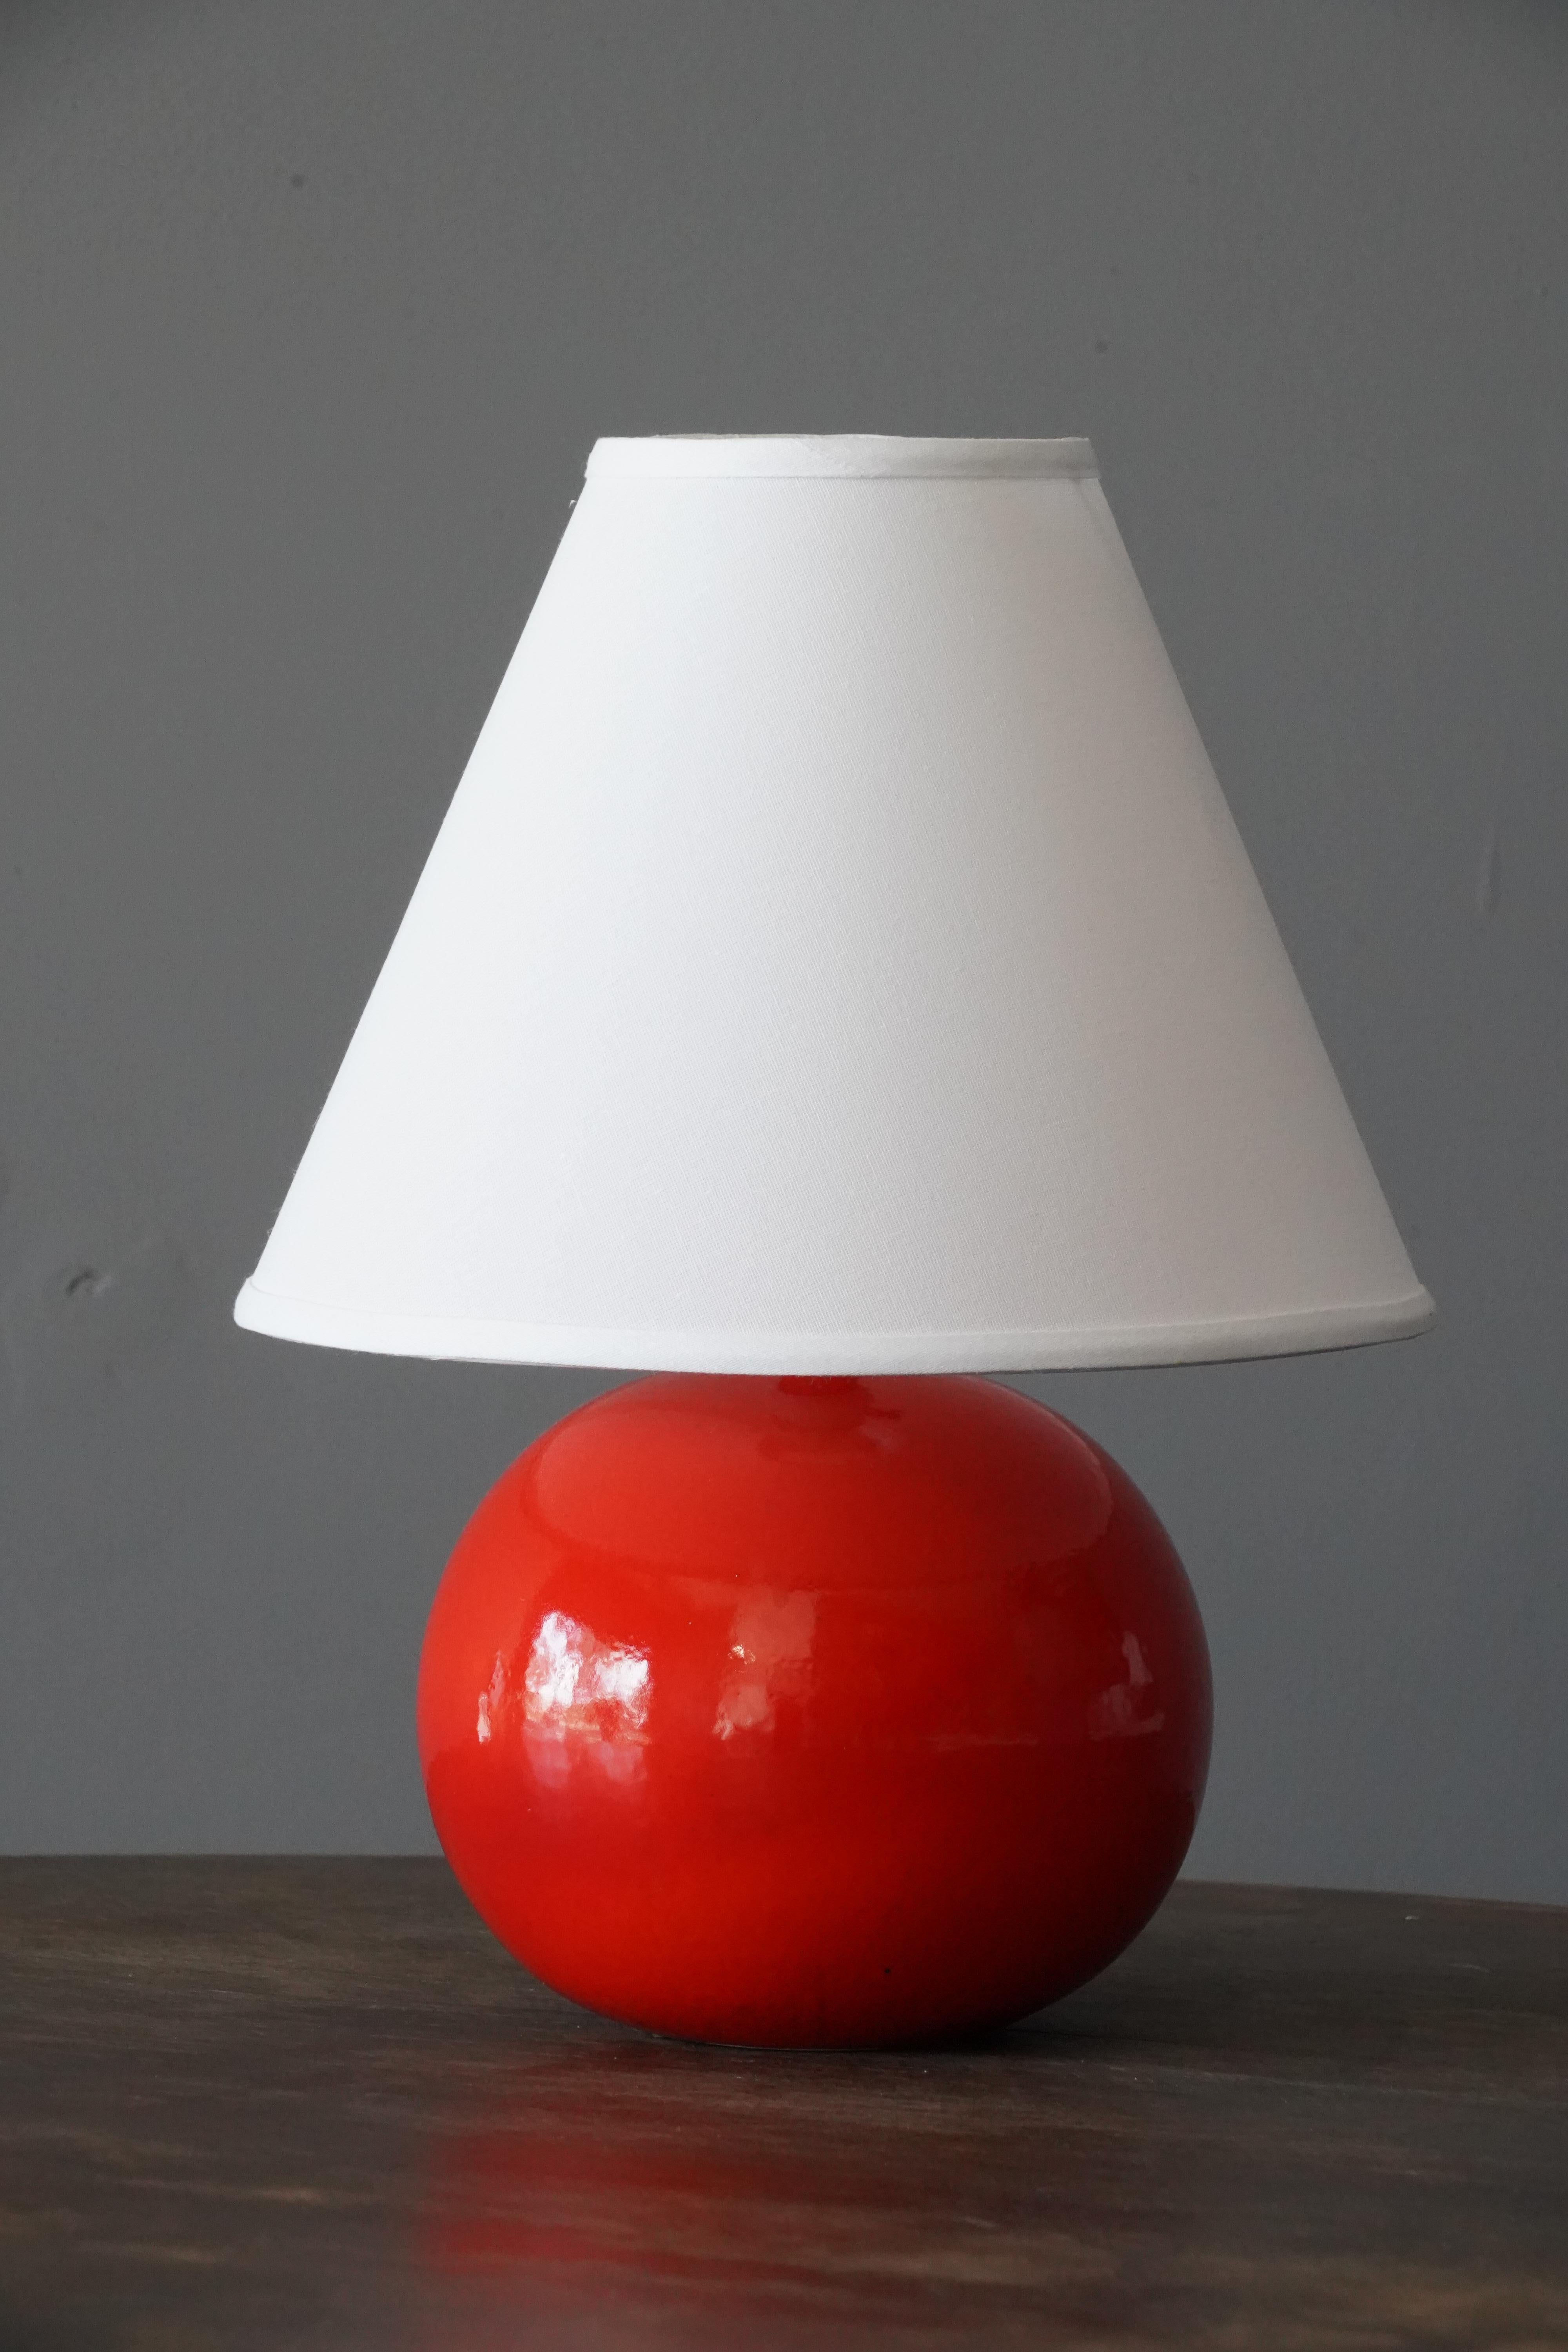 A table lamp or desk lamp designed by Stig Lindberg. Produced by Gustavsberg. 

With makers stamp

Stated dimensions exclude lampshade. Height includes socket. Sold without lampshade.

Glaze features a red color.

Other designers of the period